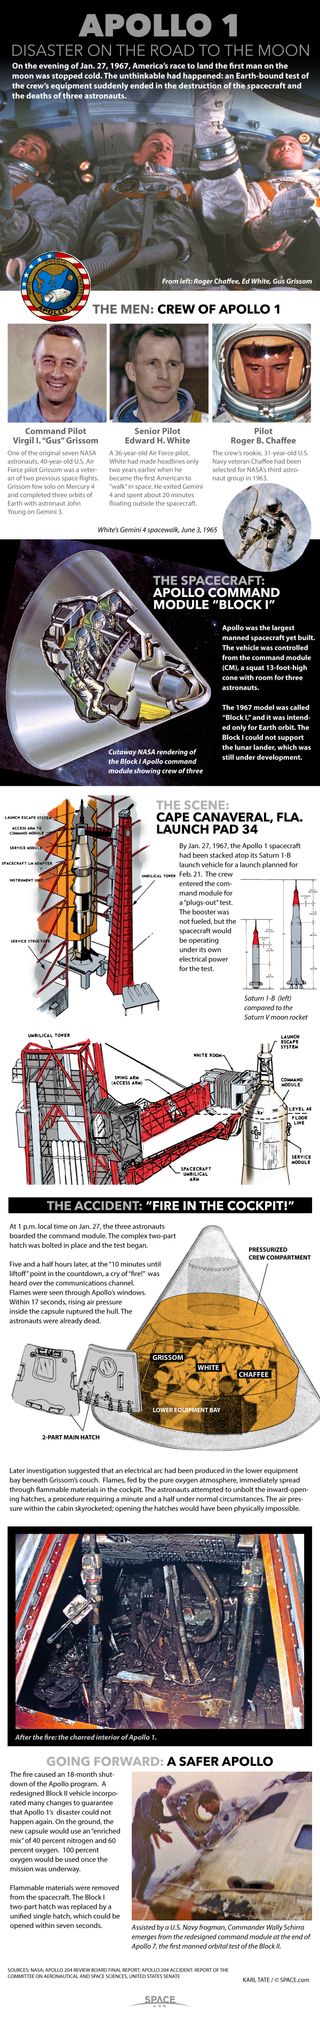 On Jan. 27, 1967, the crew of Apollo 1 was killed when fire engulfed their spacecraft during a ground test. The disaster stalled America's race to the moon for a year and a half. See how the Apollo 1 fire tragedy happened in our full infographic.